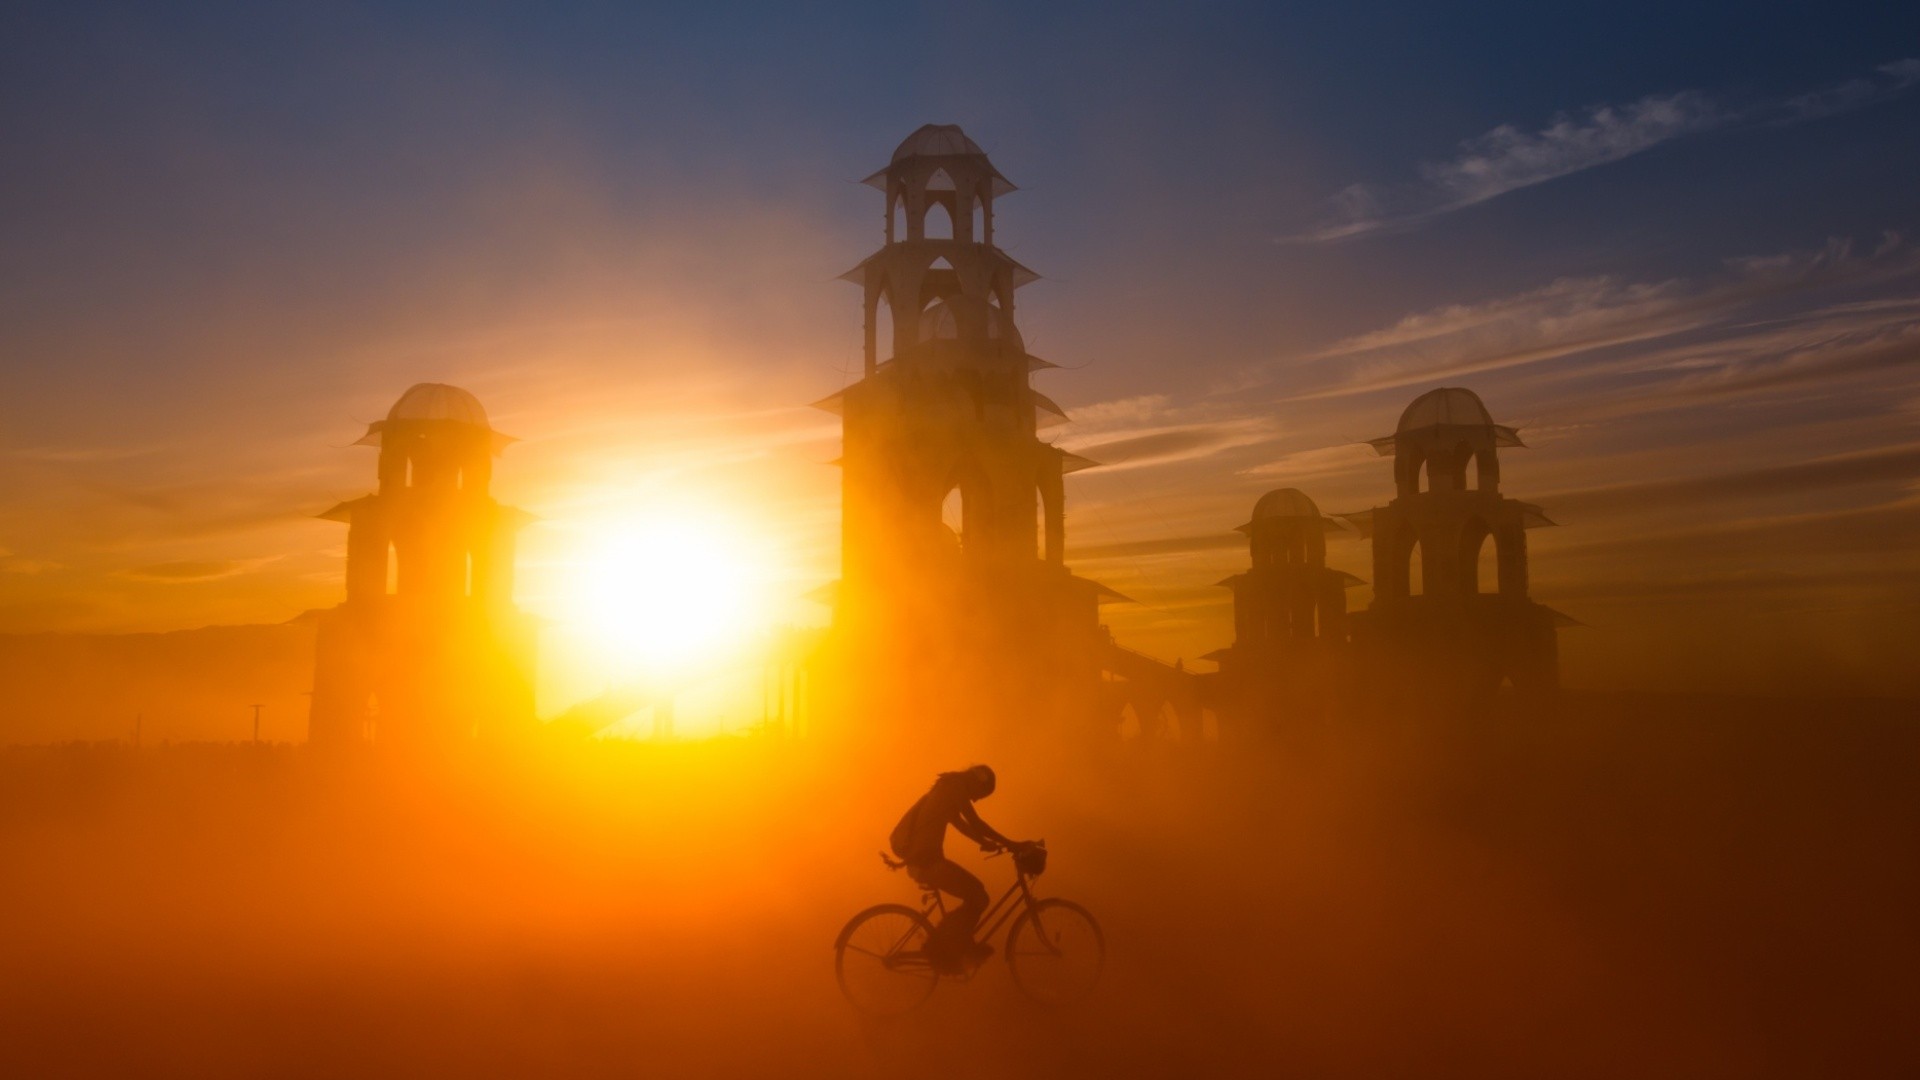 General 1920x1080 nature architecture bicycle Sun sunlight clouds building Burning Man